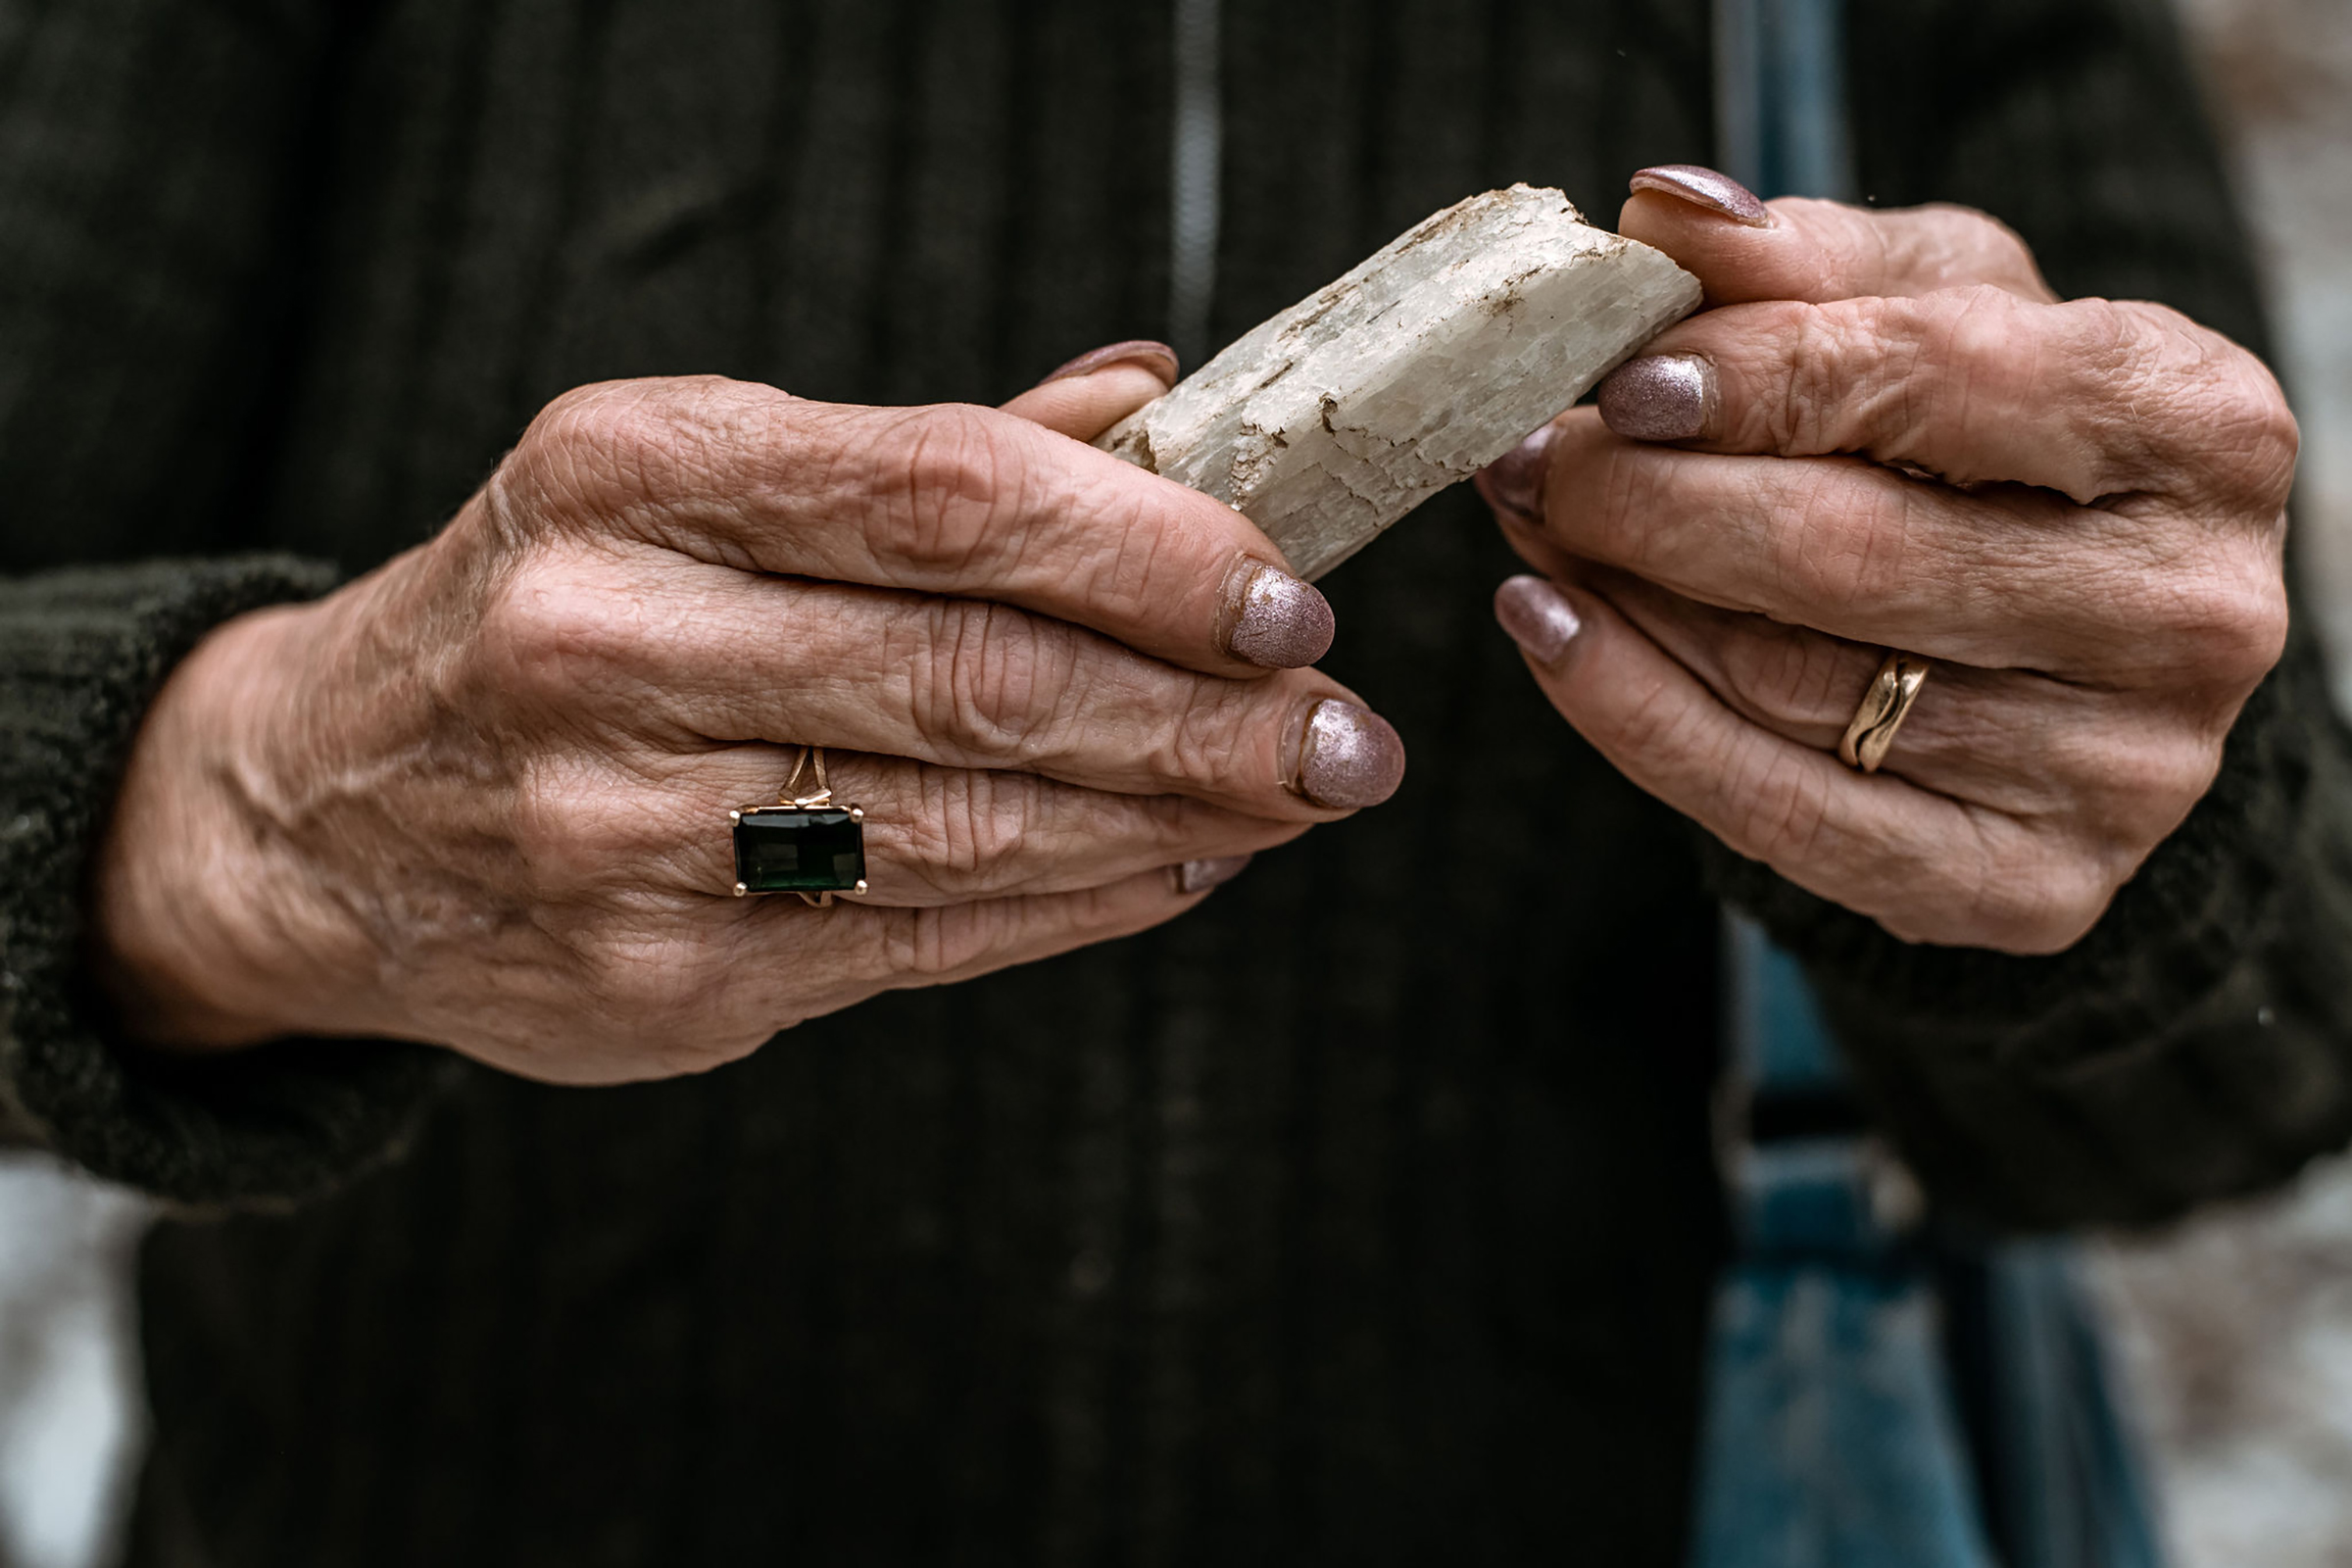 Mary Freeman holds a spodumene crystal, which contains lithium, found in the test pit she and her husband Gary own in Newry, Maine, on June 6. (Garrick Hoffman—The Maine Monitor)